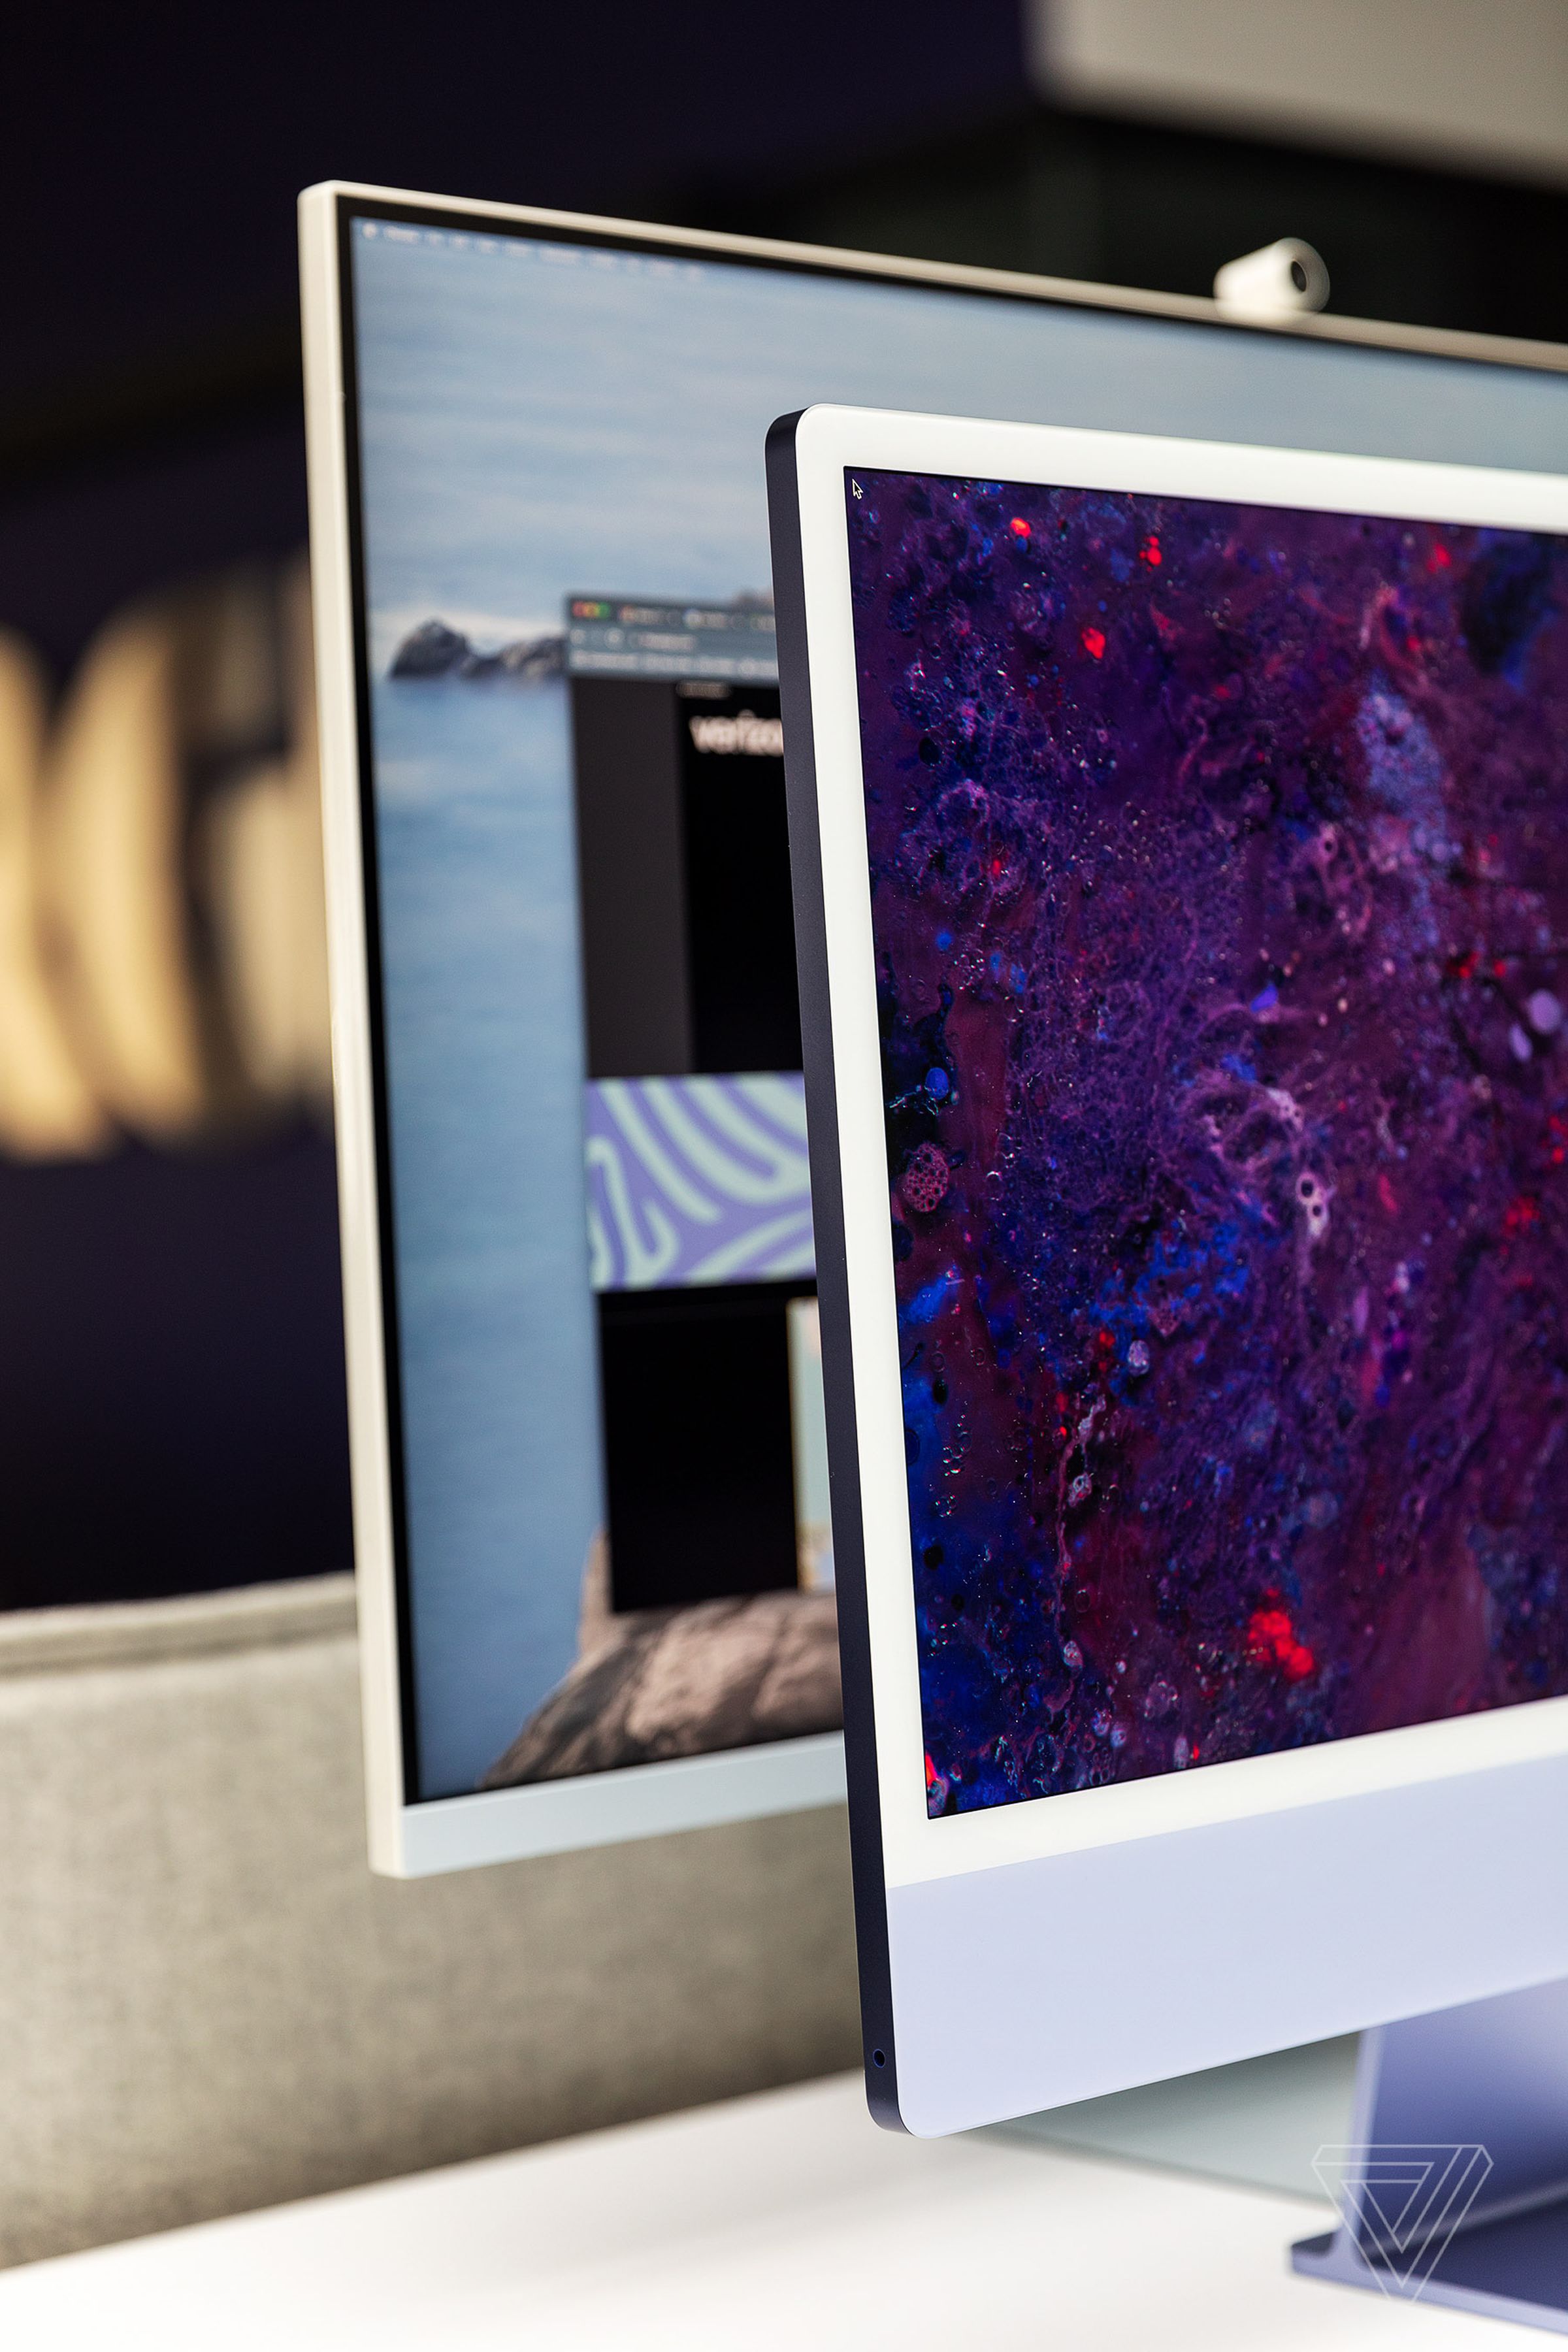 The Samsung M8 smart monitor, background, with an M1 iMac in the foreground, highlighting the similarities in design.